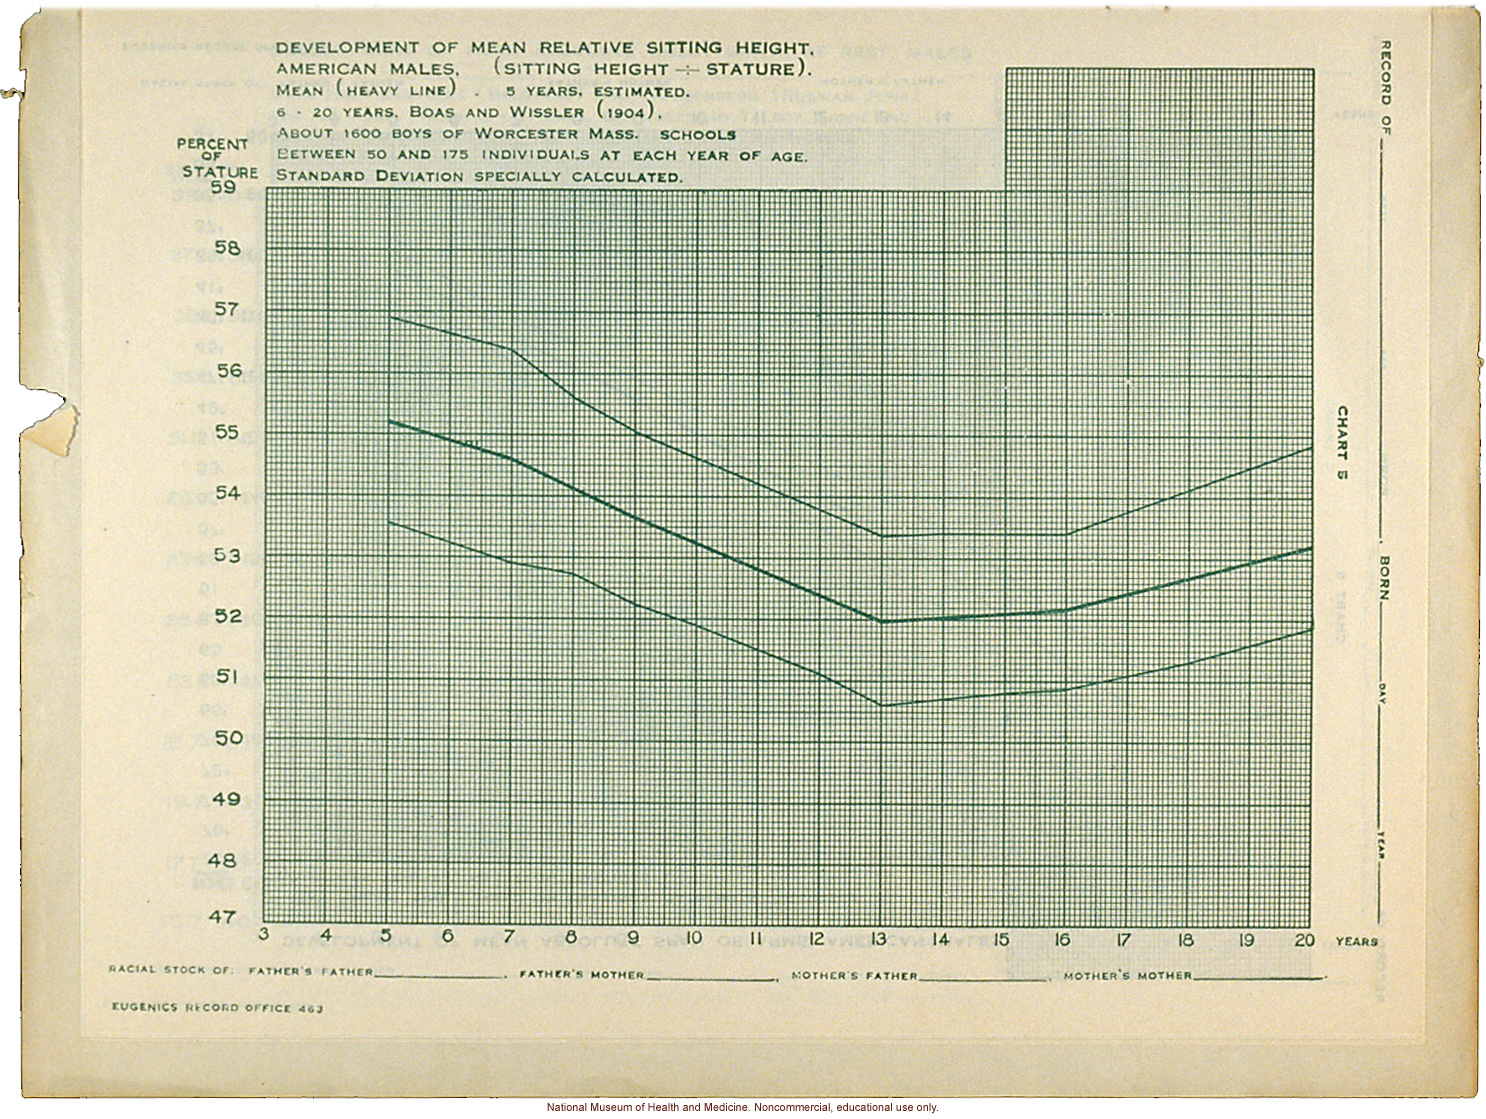 &quote;Physical Development Record for American Males,&quote; Eugenics Record Office (including forms, directions, and growth graphs)